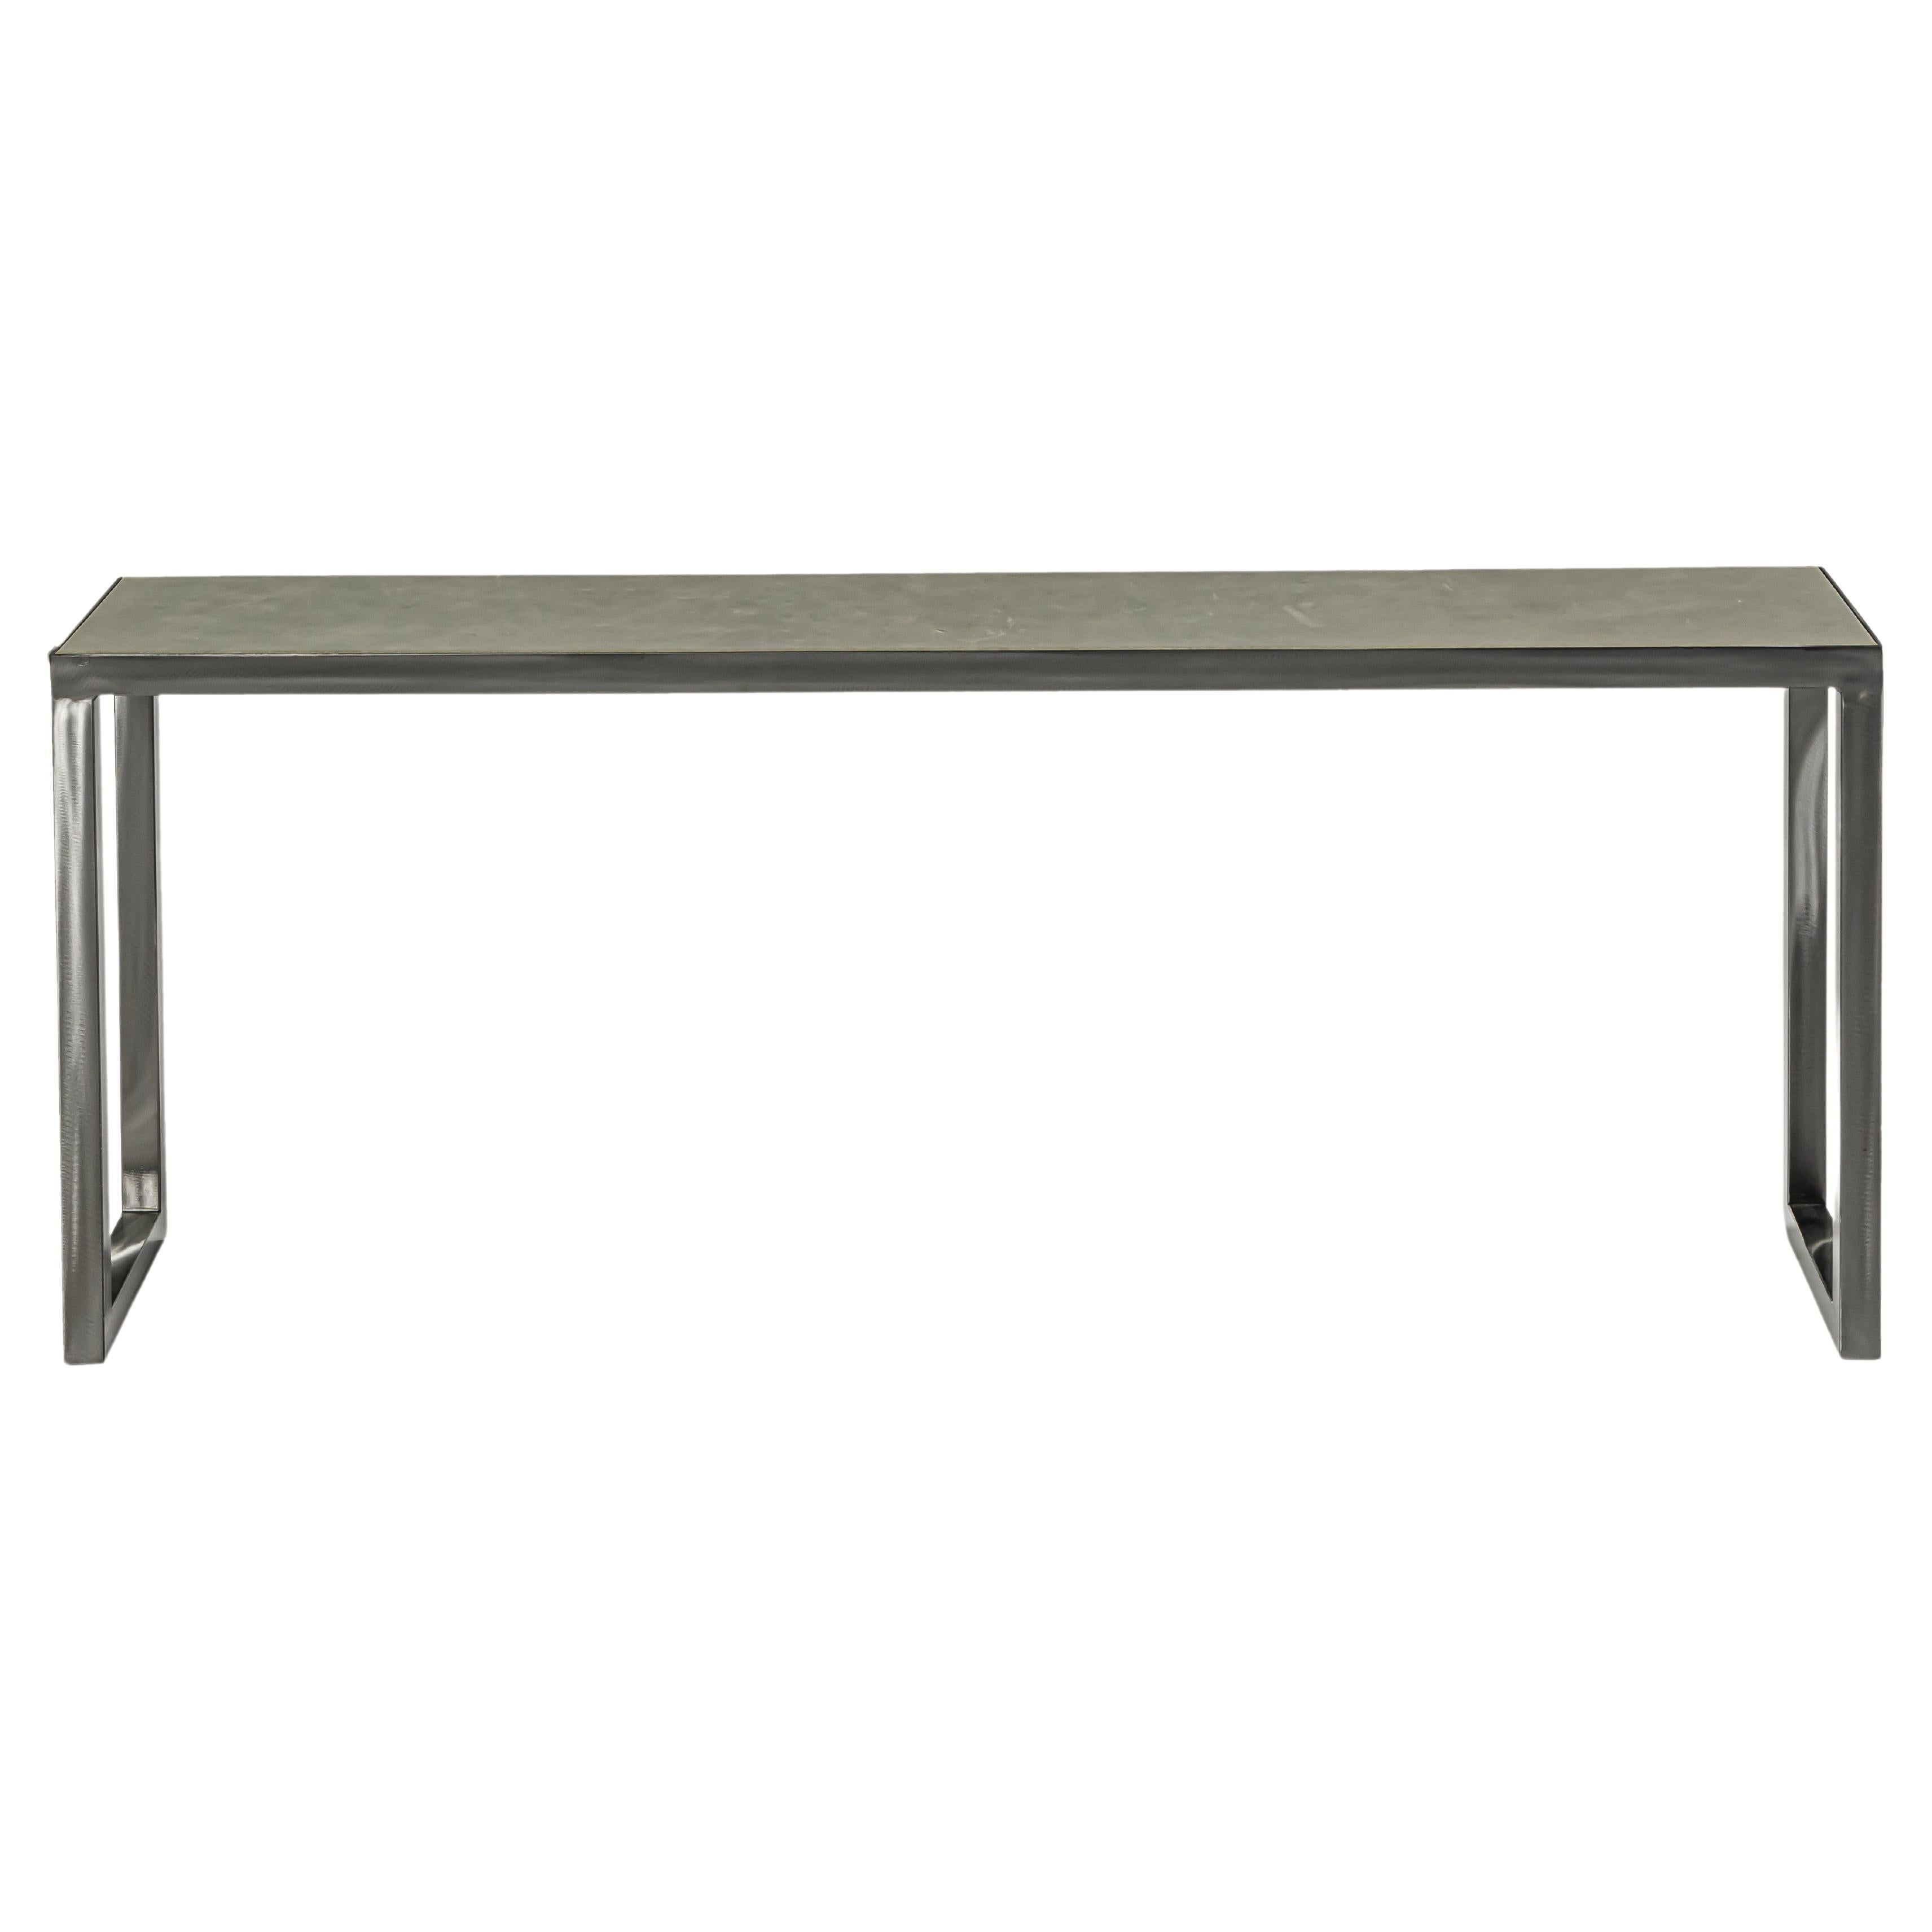 "Trinity Console" by Baxter, Leather/ Wood, Silver/ Gray Finish, Italy 2011